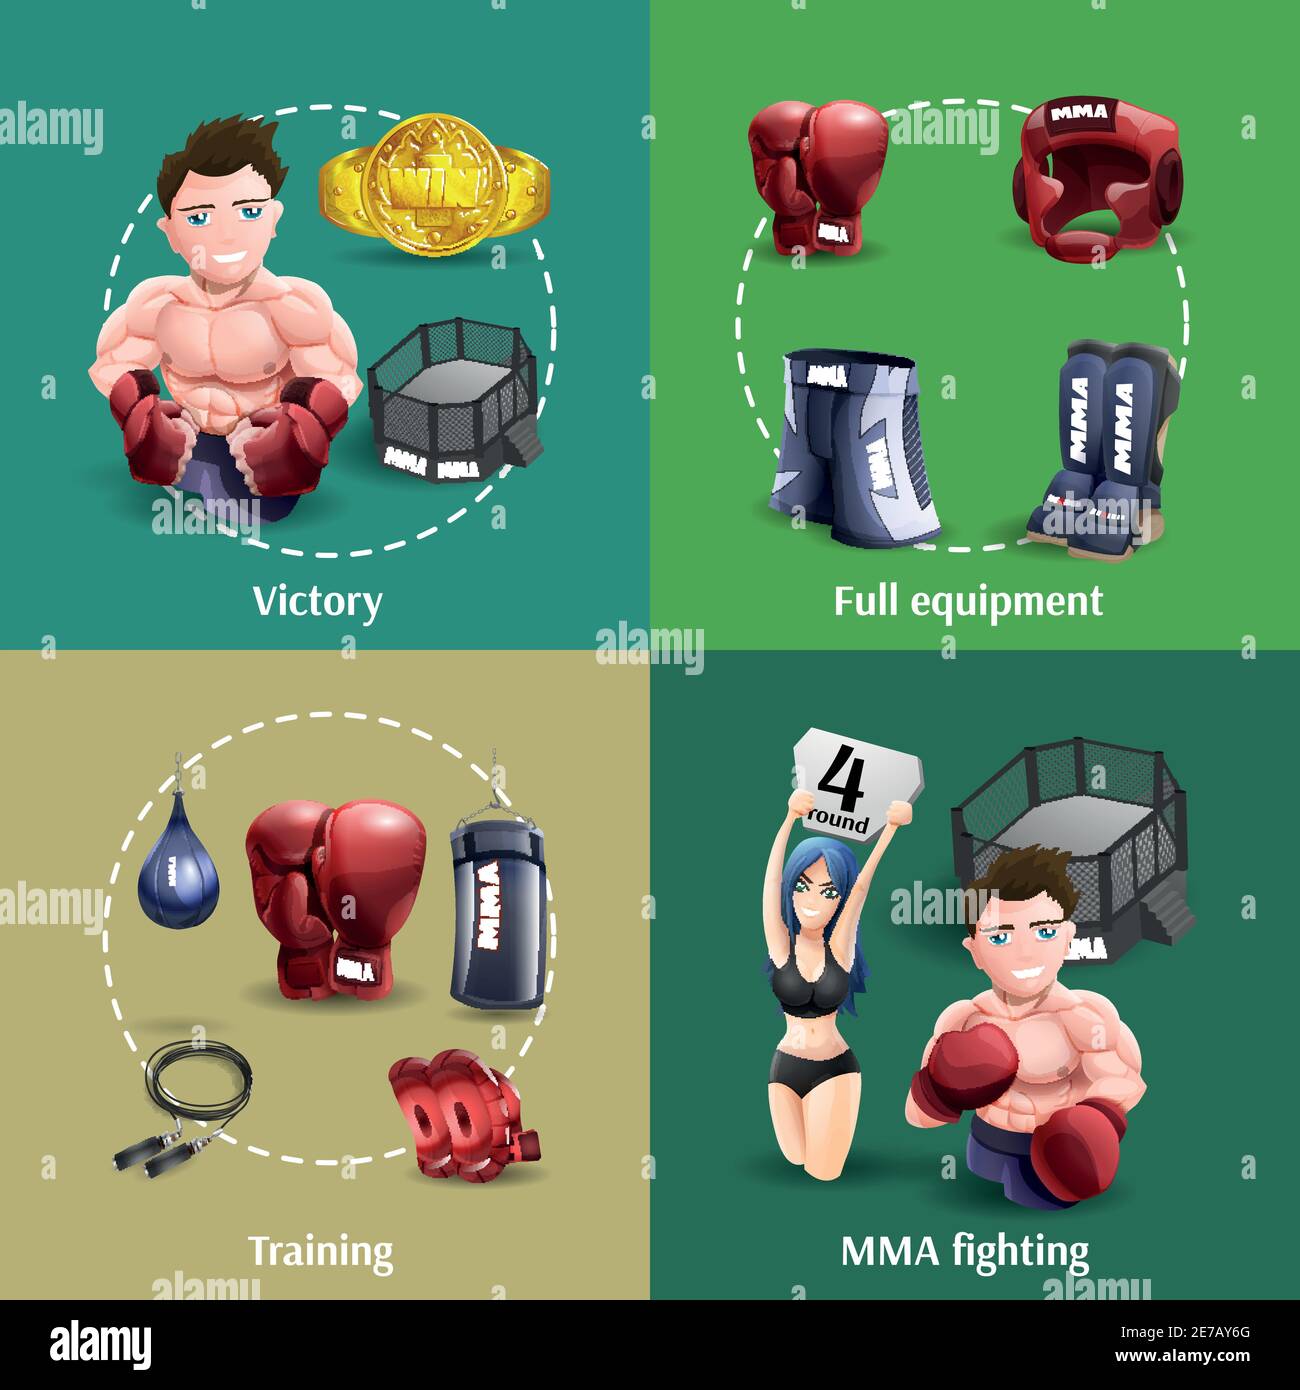 Mma fighting training full equipment and champion 4 3d icons square composition banner abstract isolated vector illustration Stock Vector